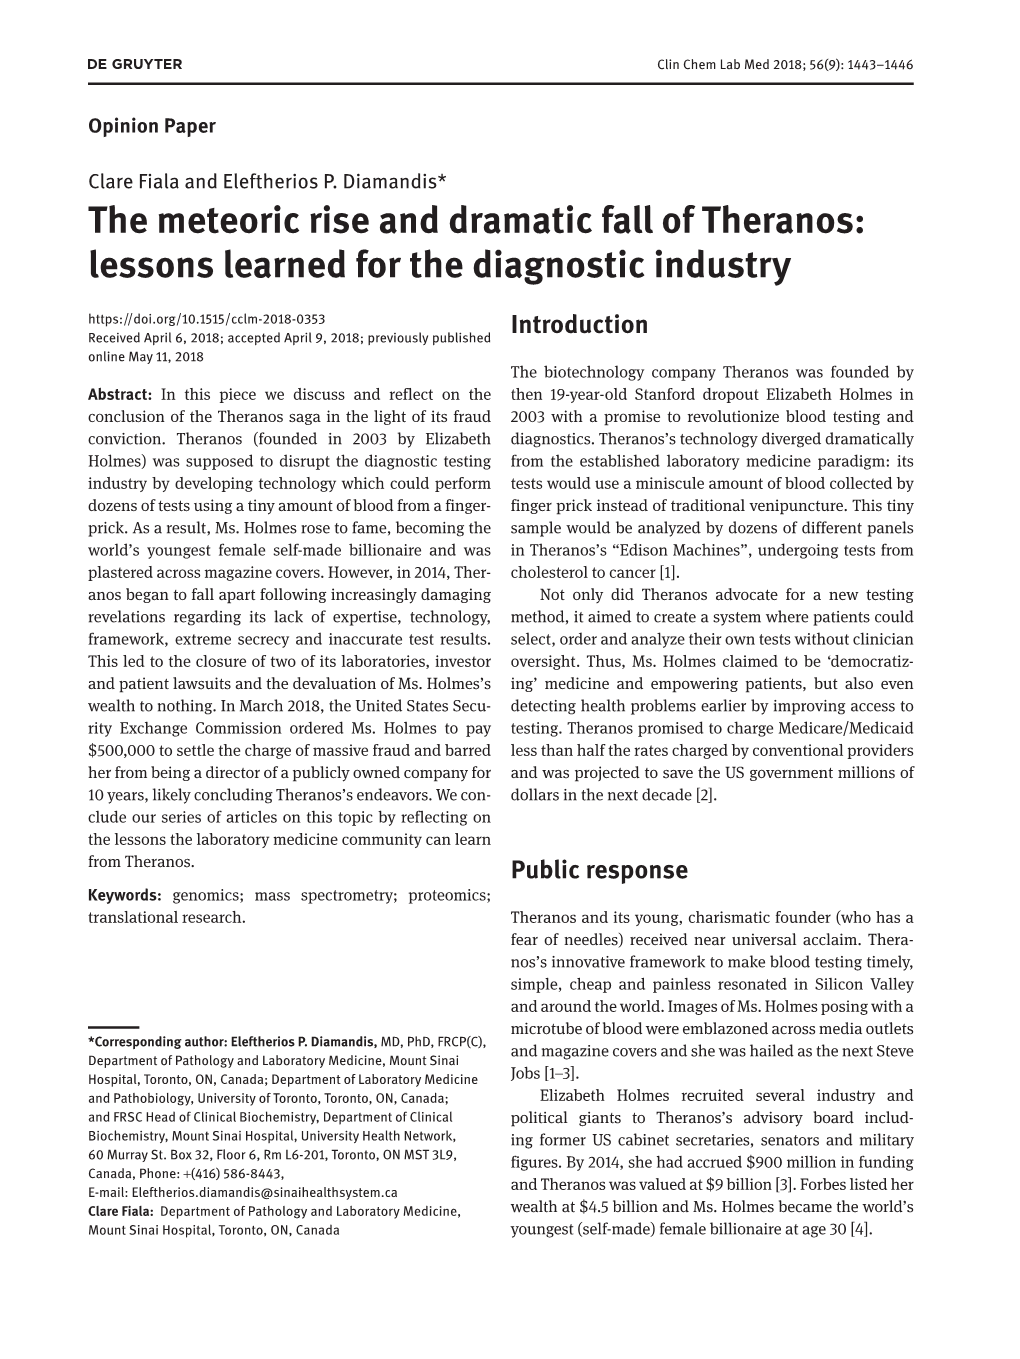 The Meteoric Rise and Dramatic Fall of Theranos: Lessons Learned for The